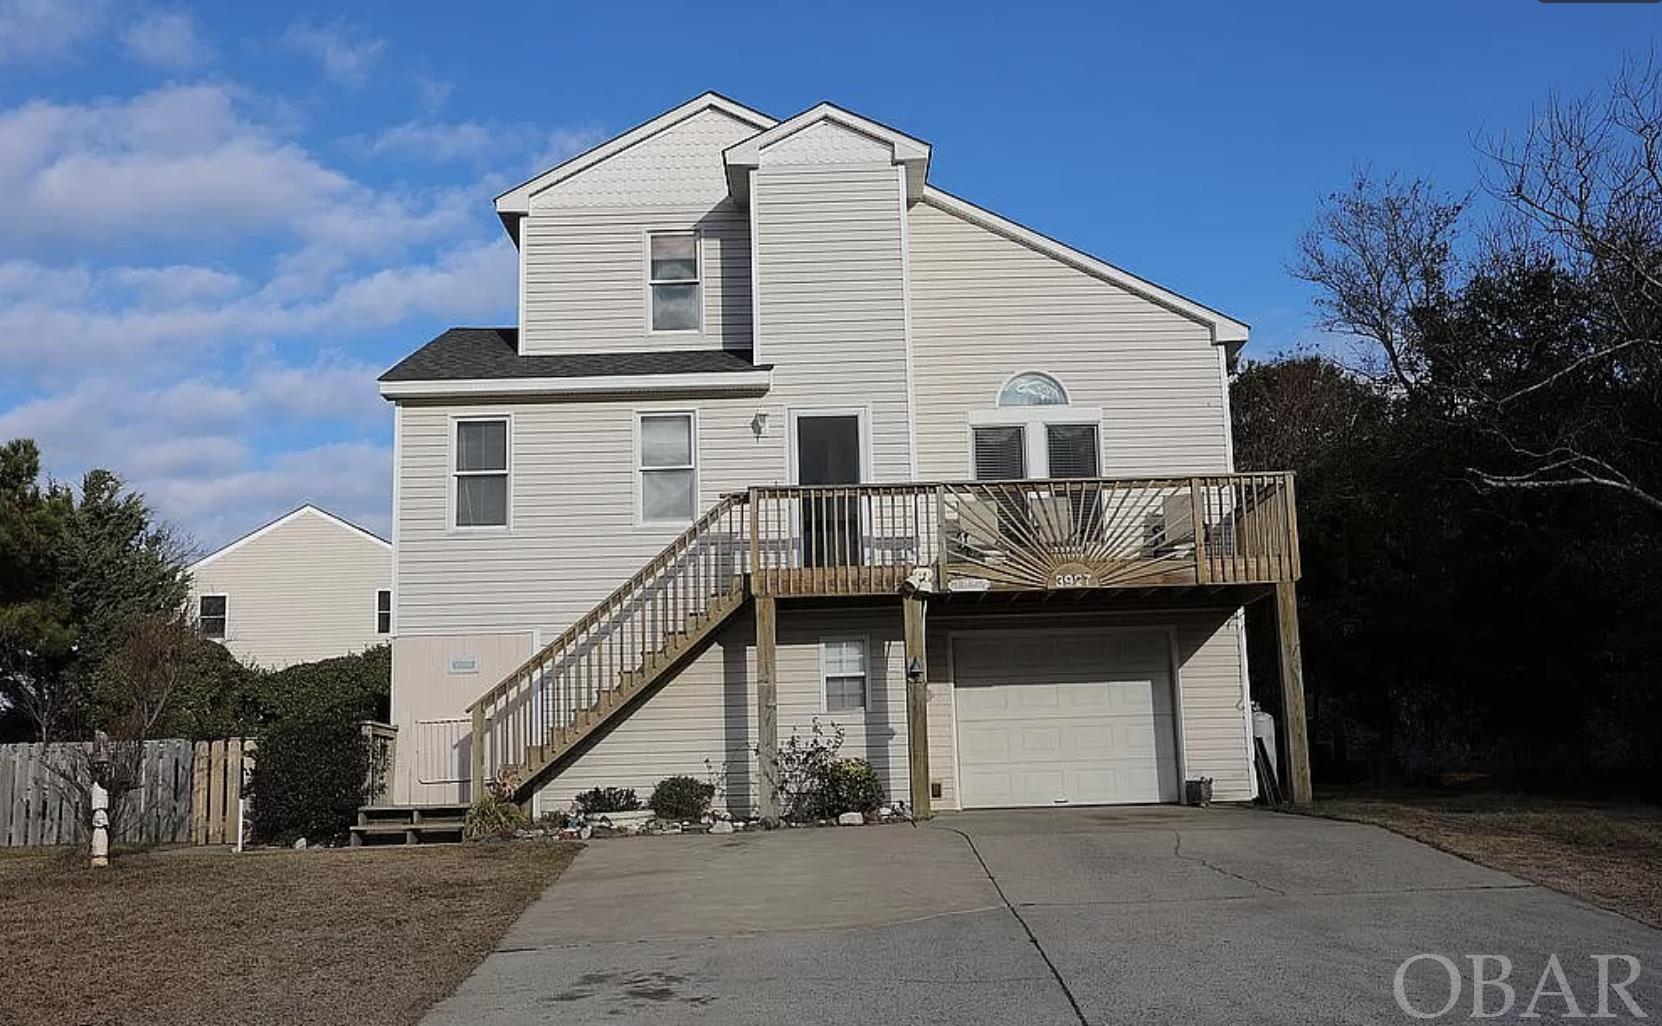 3927 Smith Street, Kitty Hawk, NC 27949, 3 Bedrooms Bedrooms, ,2 BathroomsBathrooms,Residential,For sale,Smith Street,124855